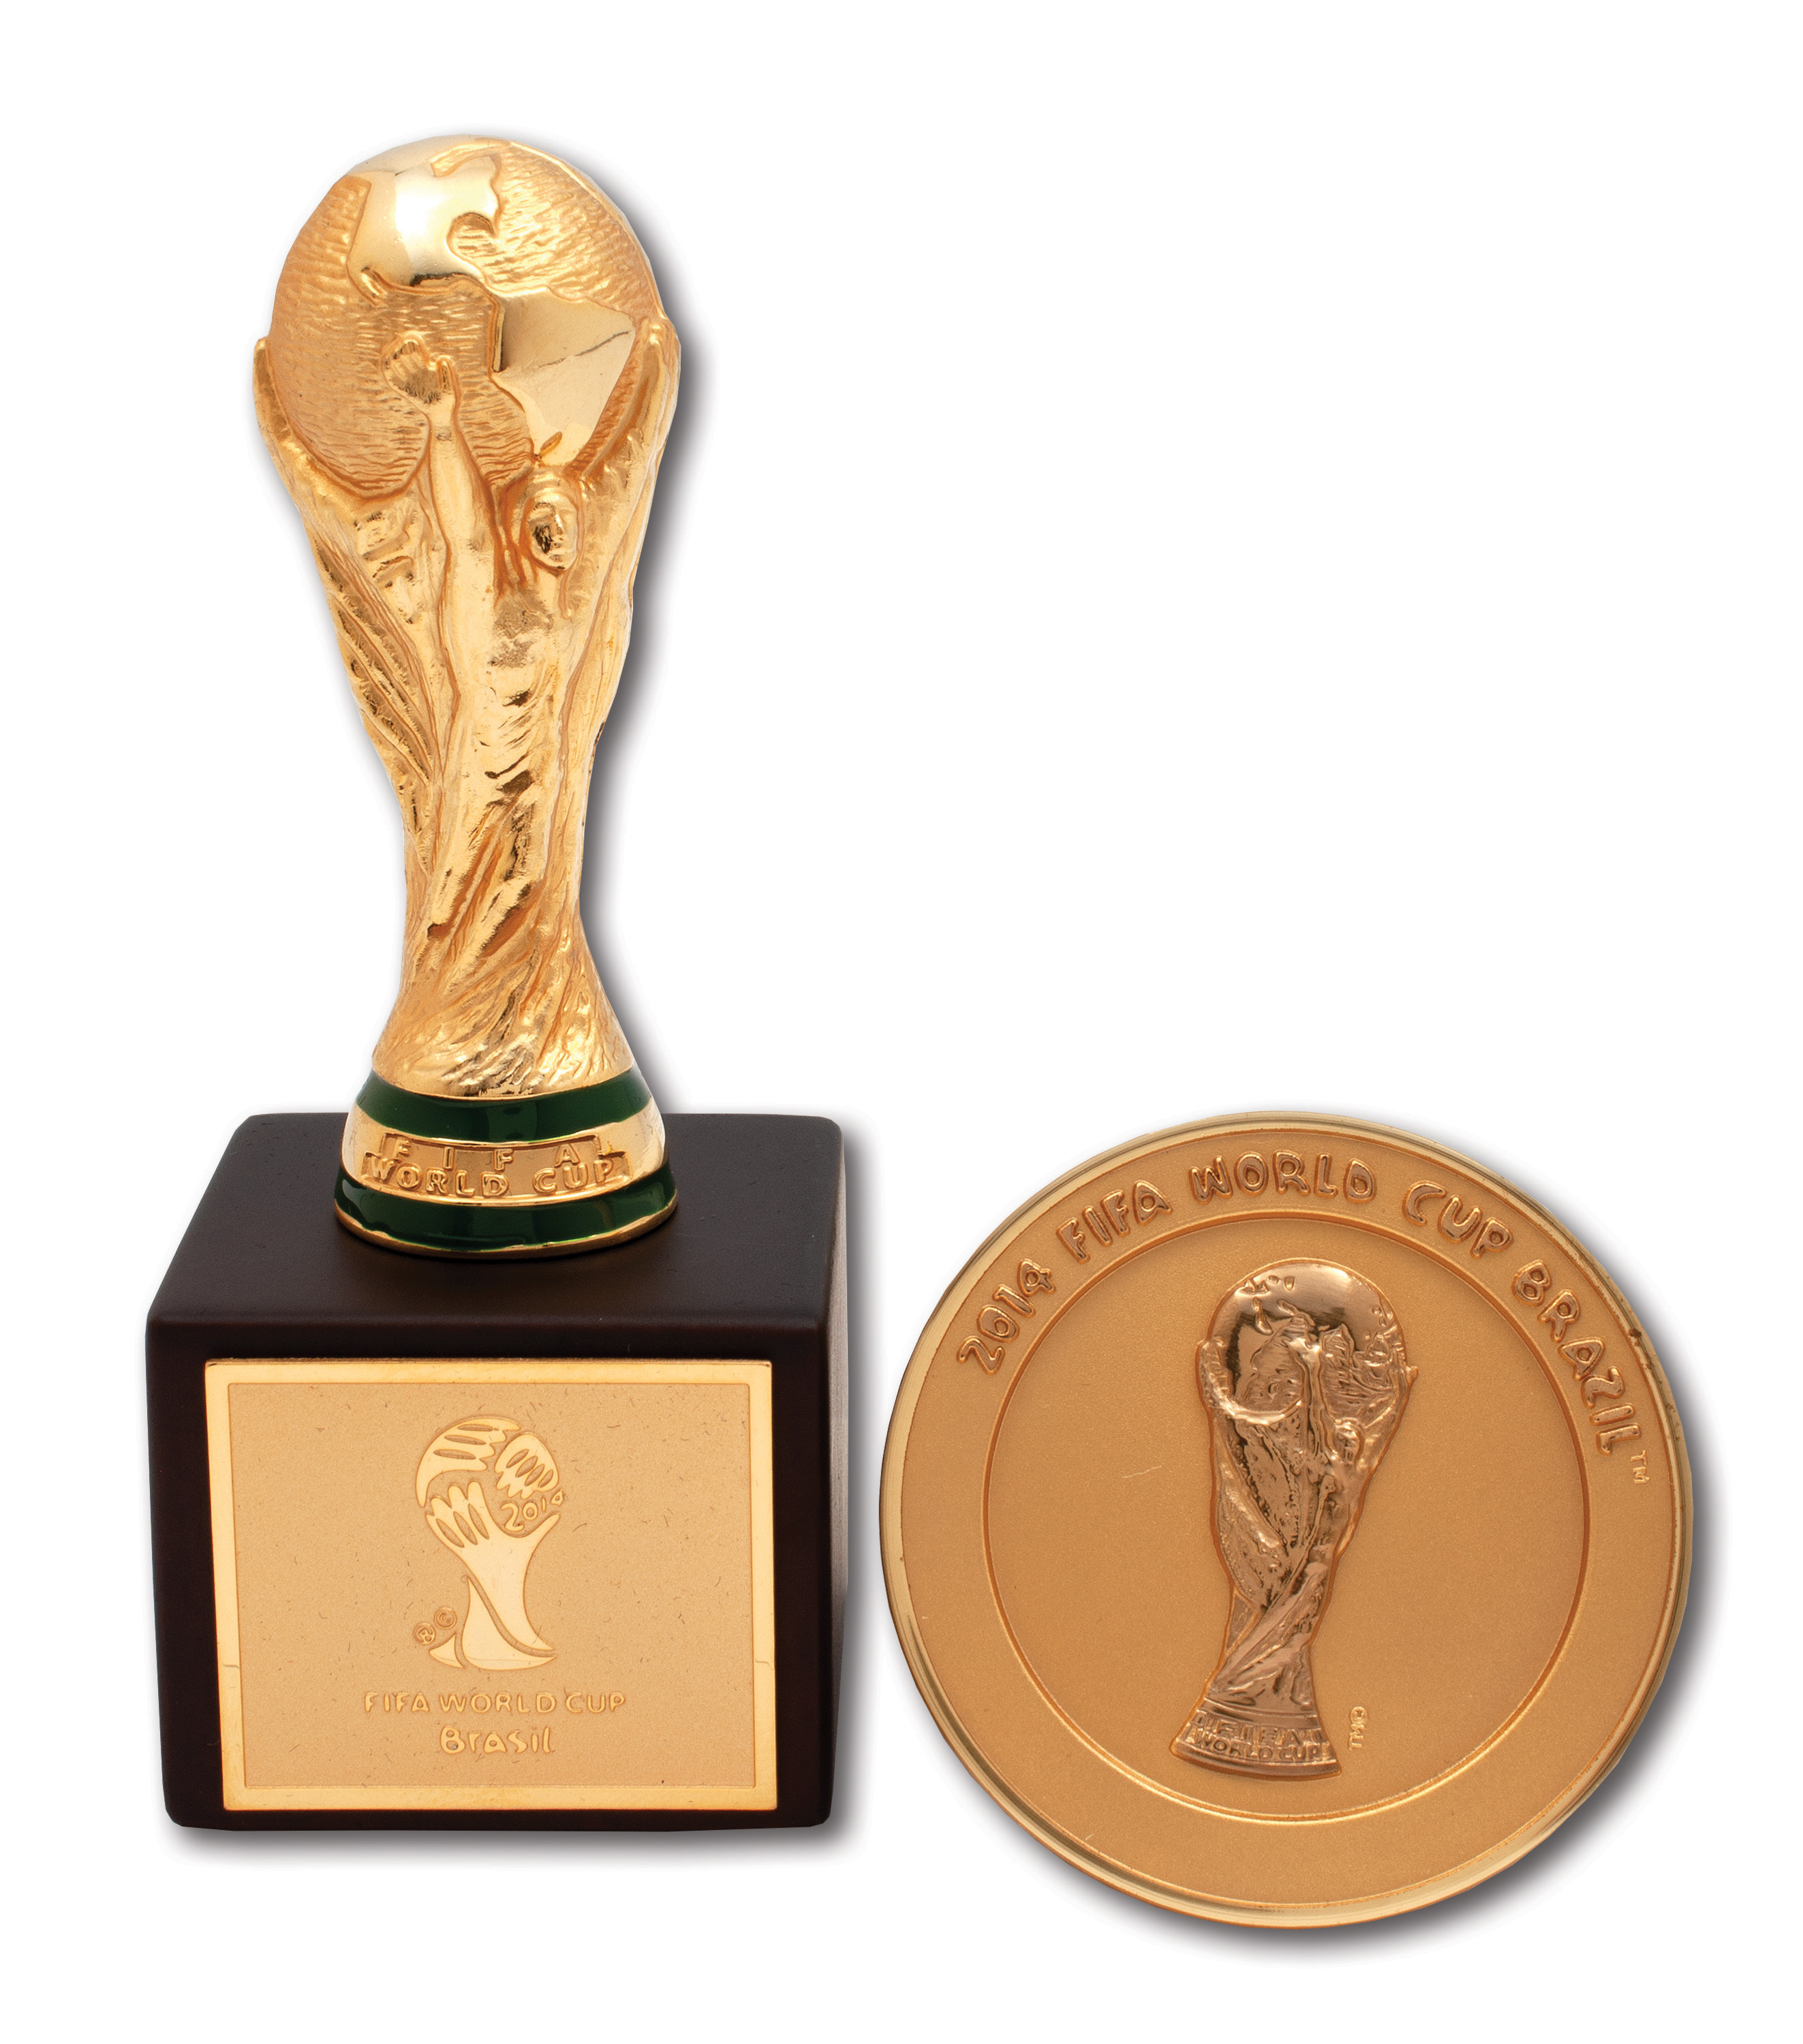 FIFA World cup 2014 Final and Simi Final trophies